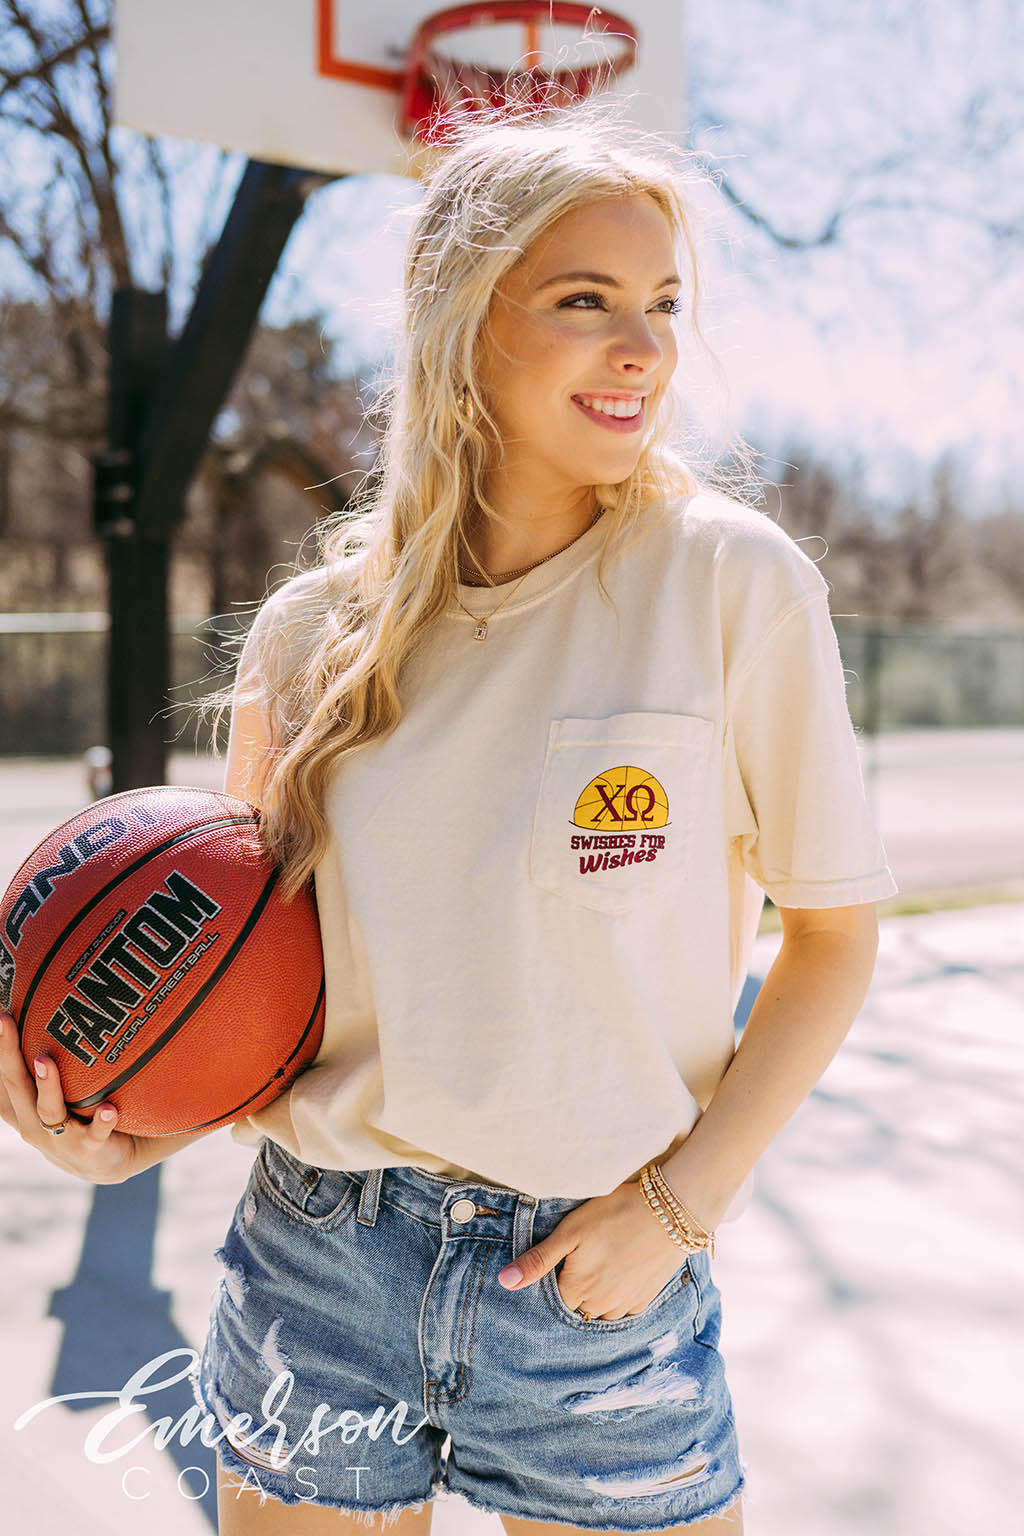 Chi Omega Swishes for Wishes Basketball Jersey Tee